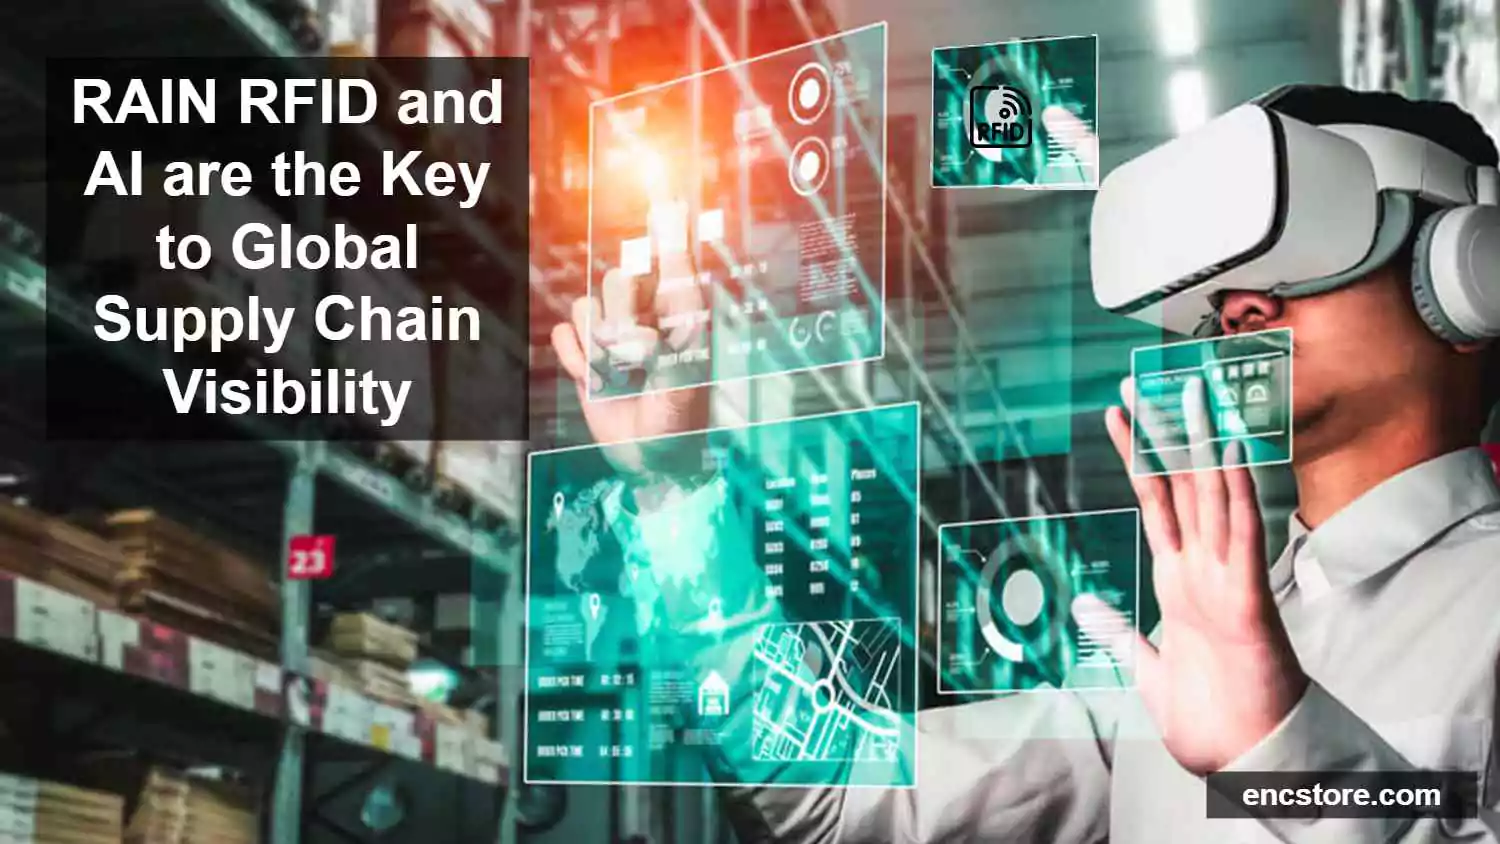 RAIN RFID and AI are the Key to Global Supply Chain Visibility